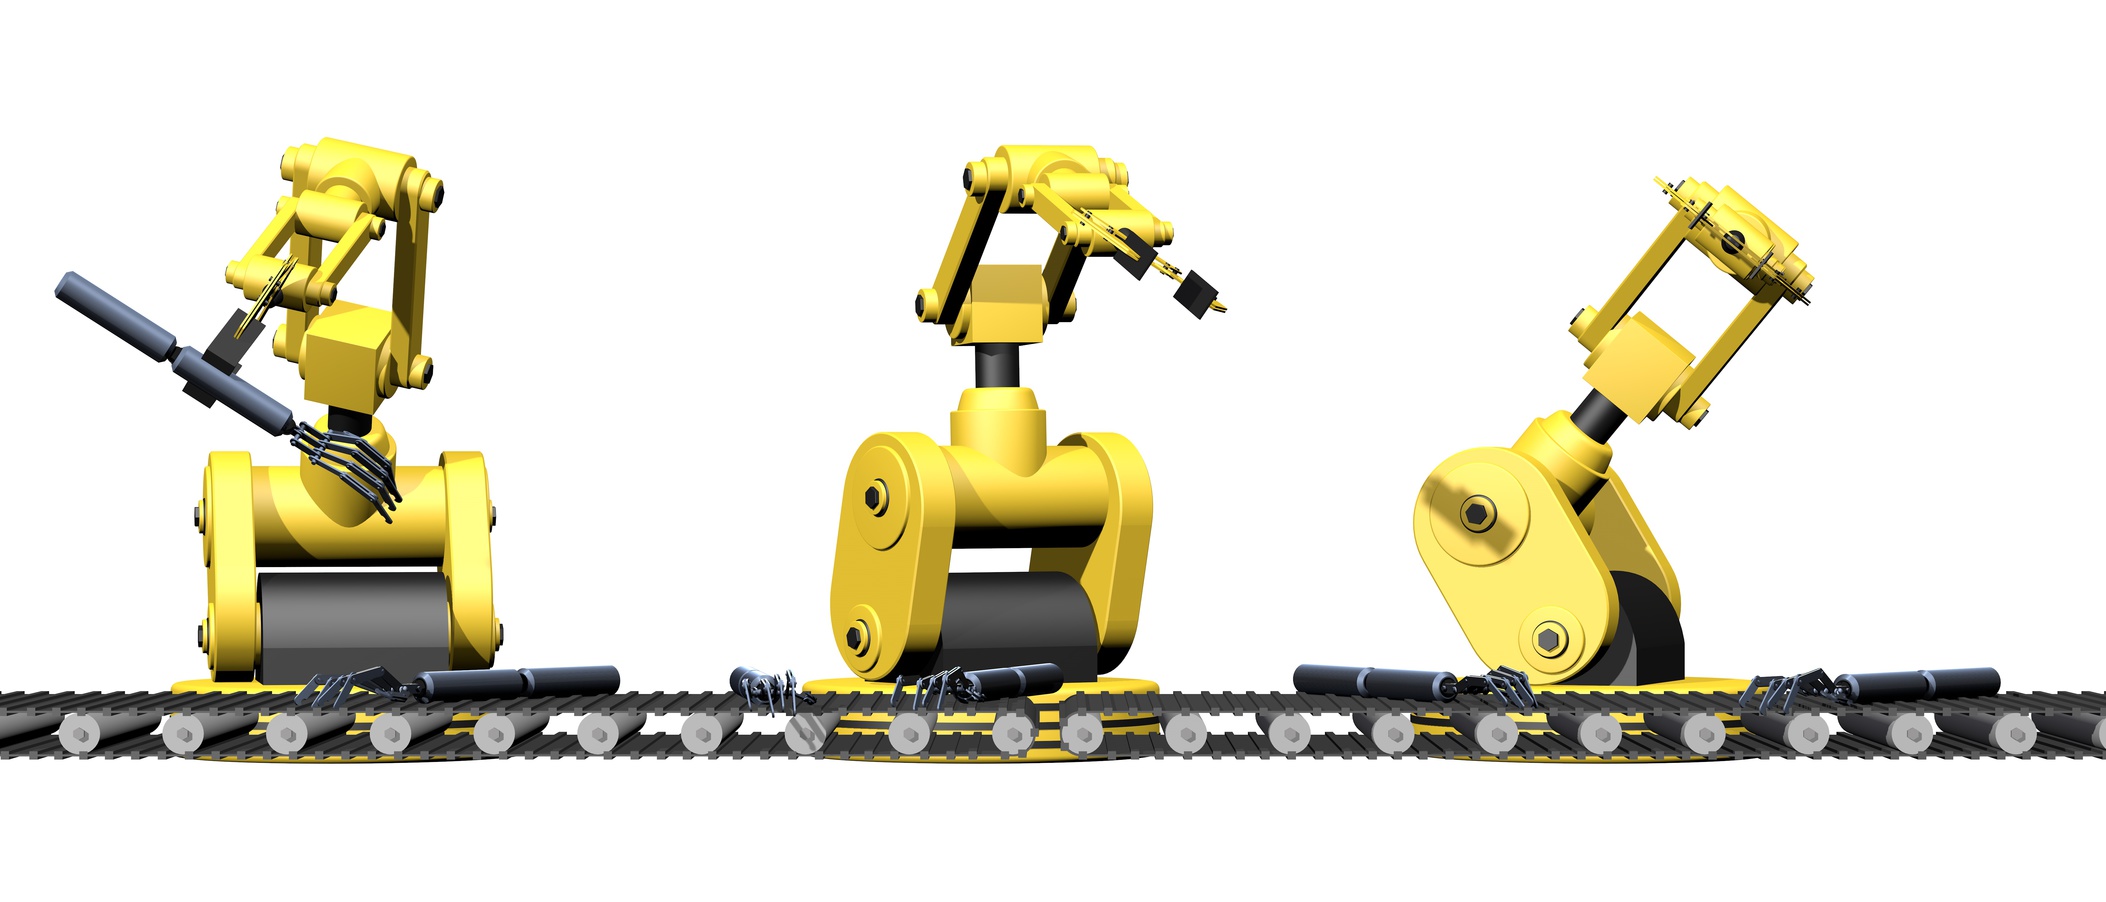 Increasing the Efficiency of Robotic Manufacturing by 40%